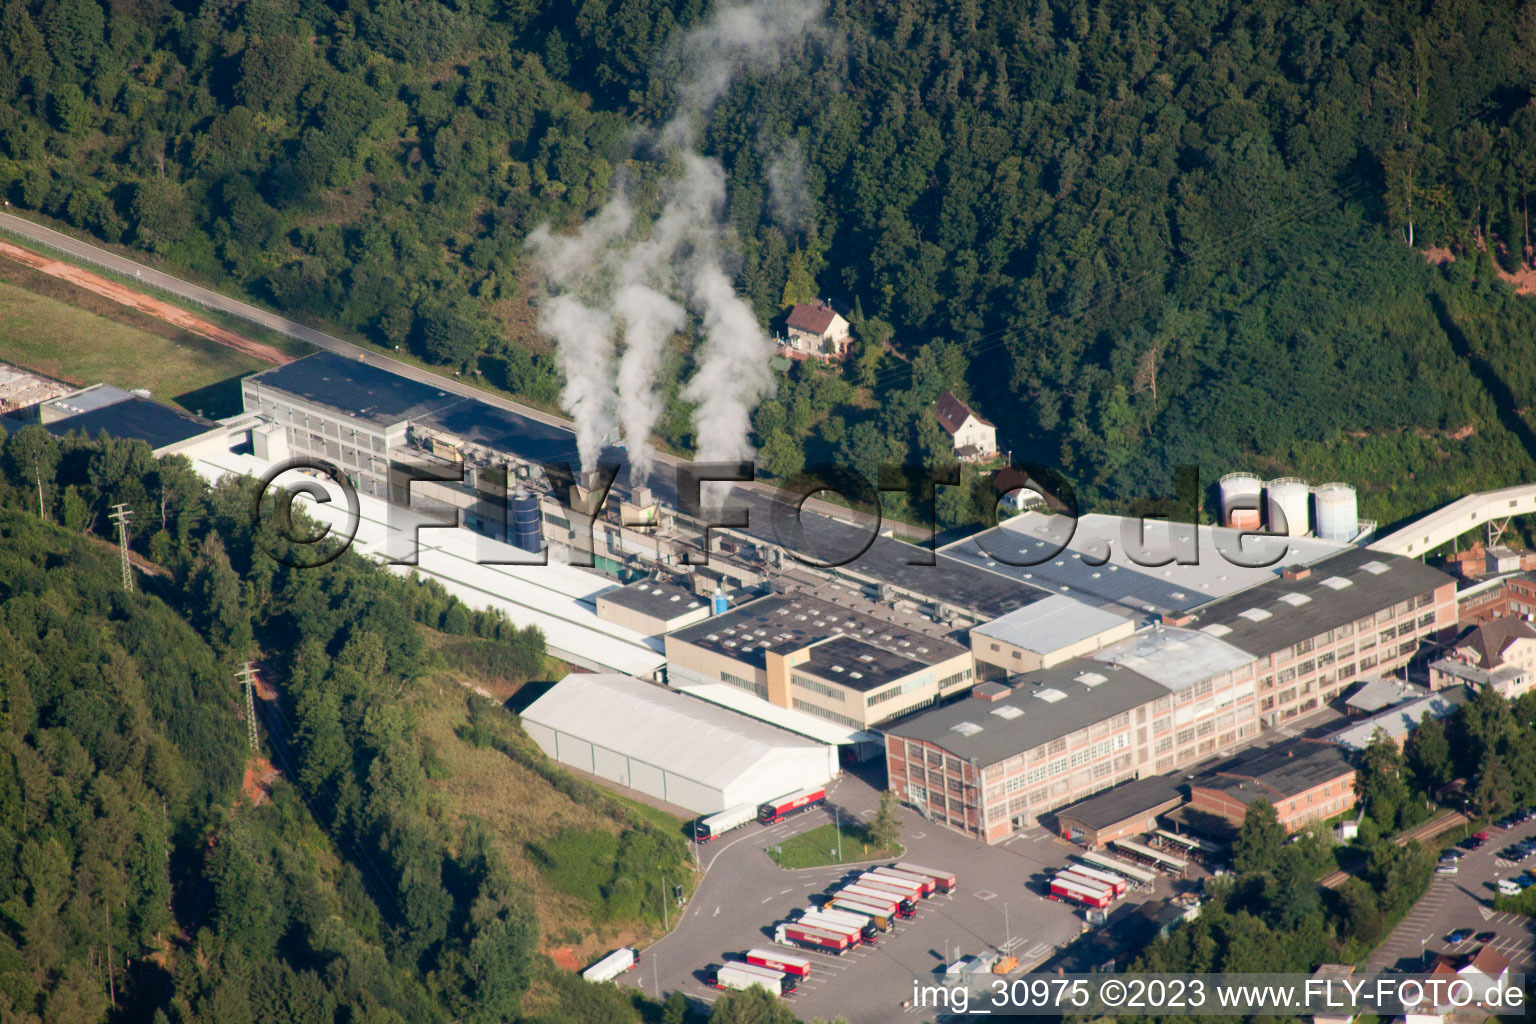 Cardboard factory Buchmann GmbH in the district Sarnstall in Annweiler am Trifels in the state Rhineland-Palatinate, Germany from above